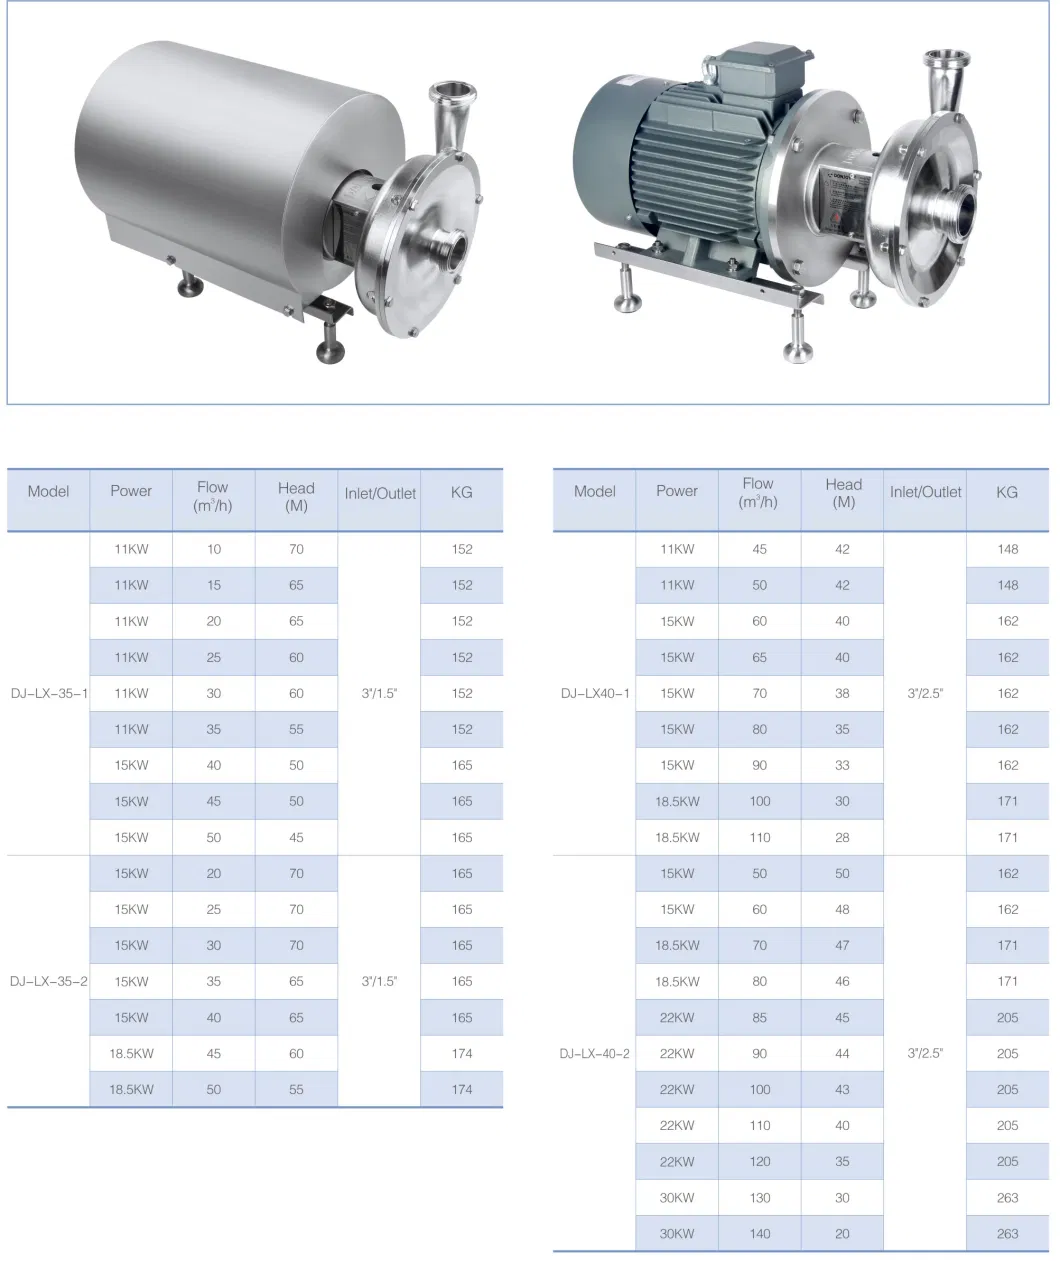 Donjoy Sanitary Explosion-Proof Centrifugal Pump for Oil Chemical